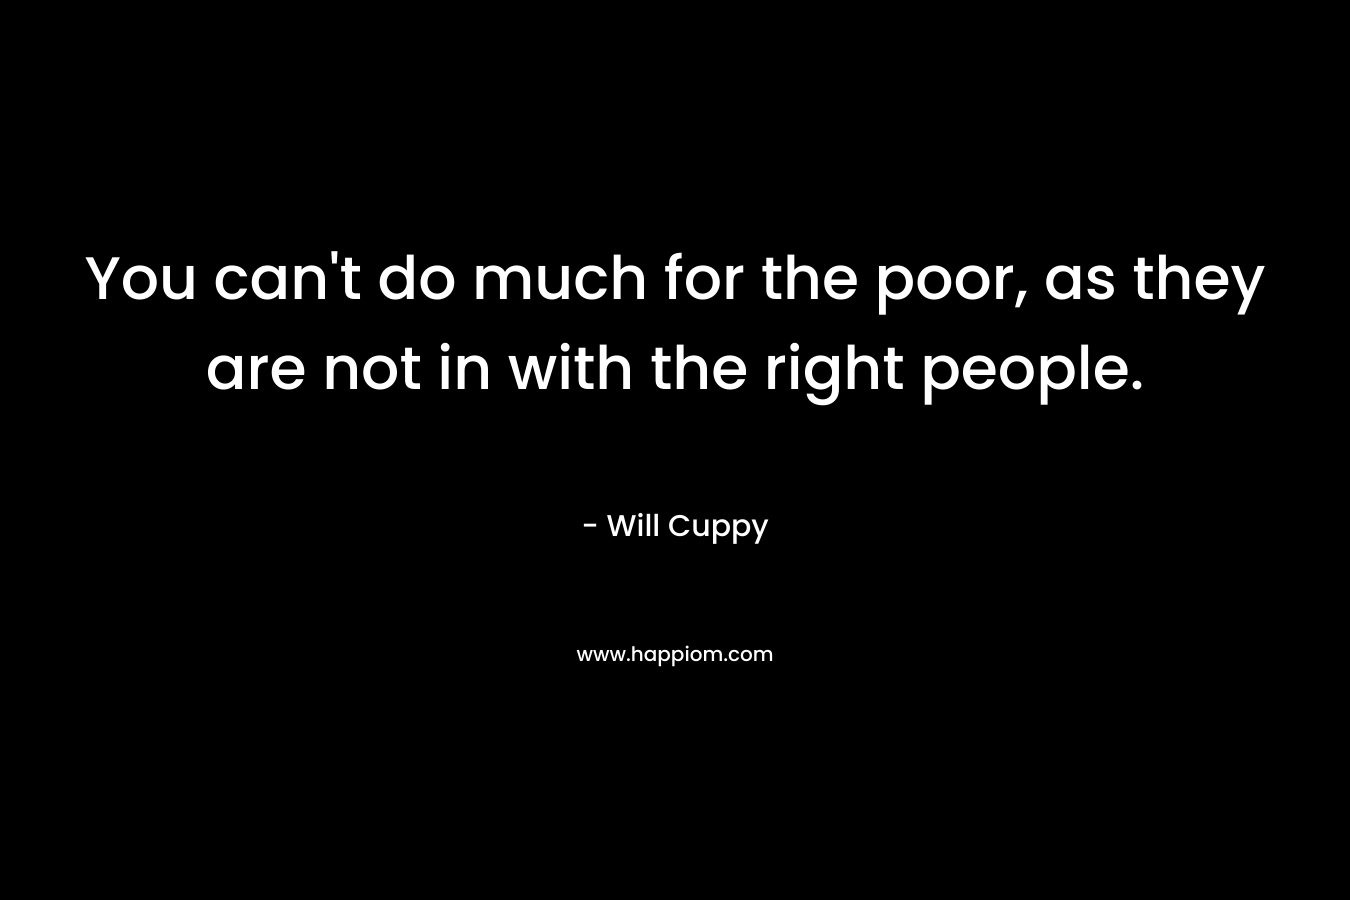 You can't do much for the poor, as they are not in with the right people.